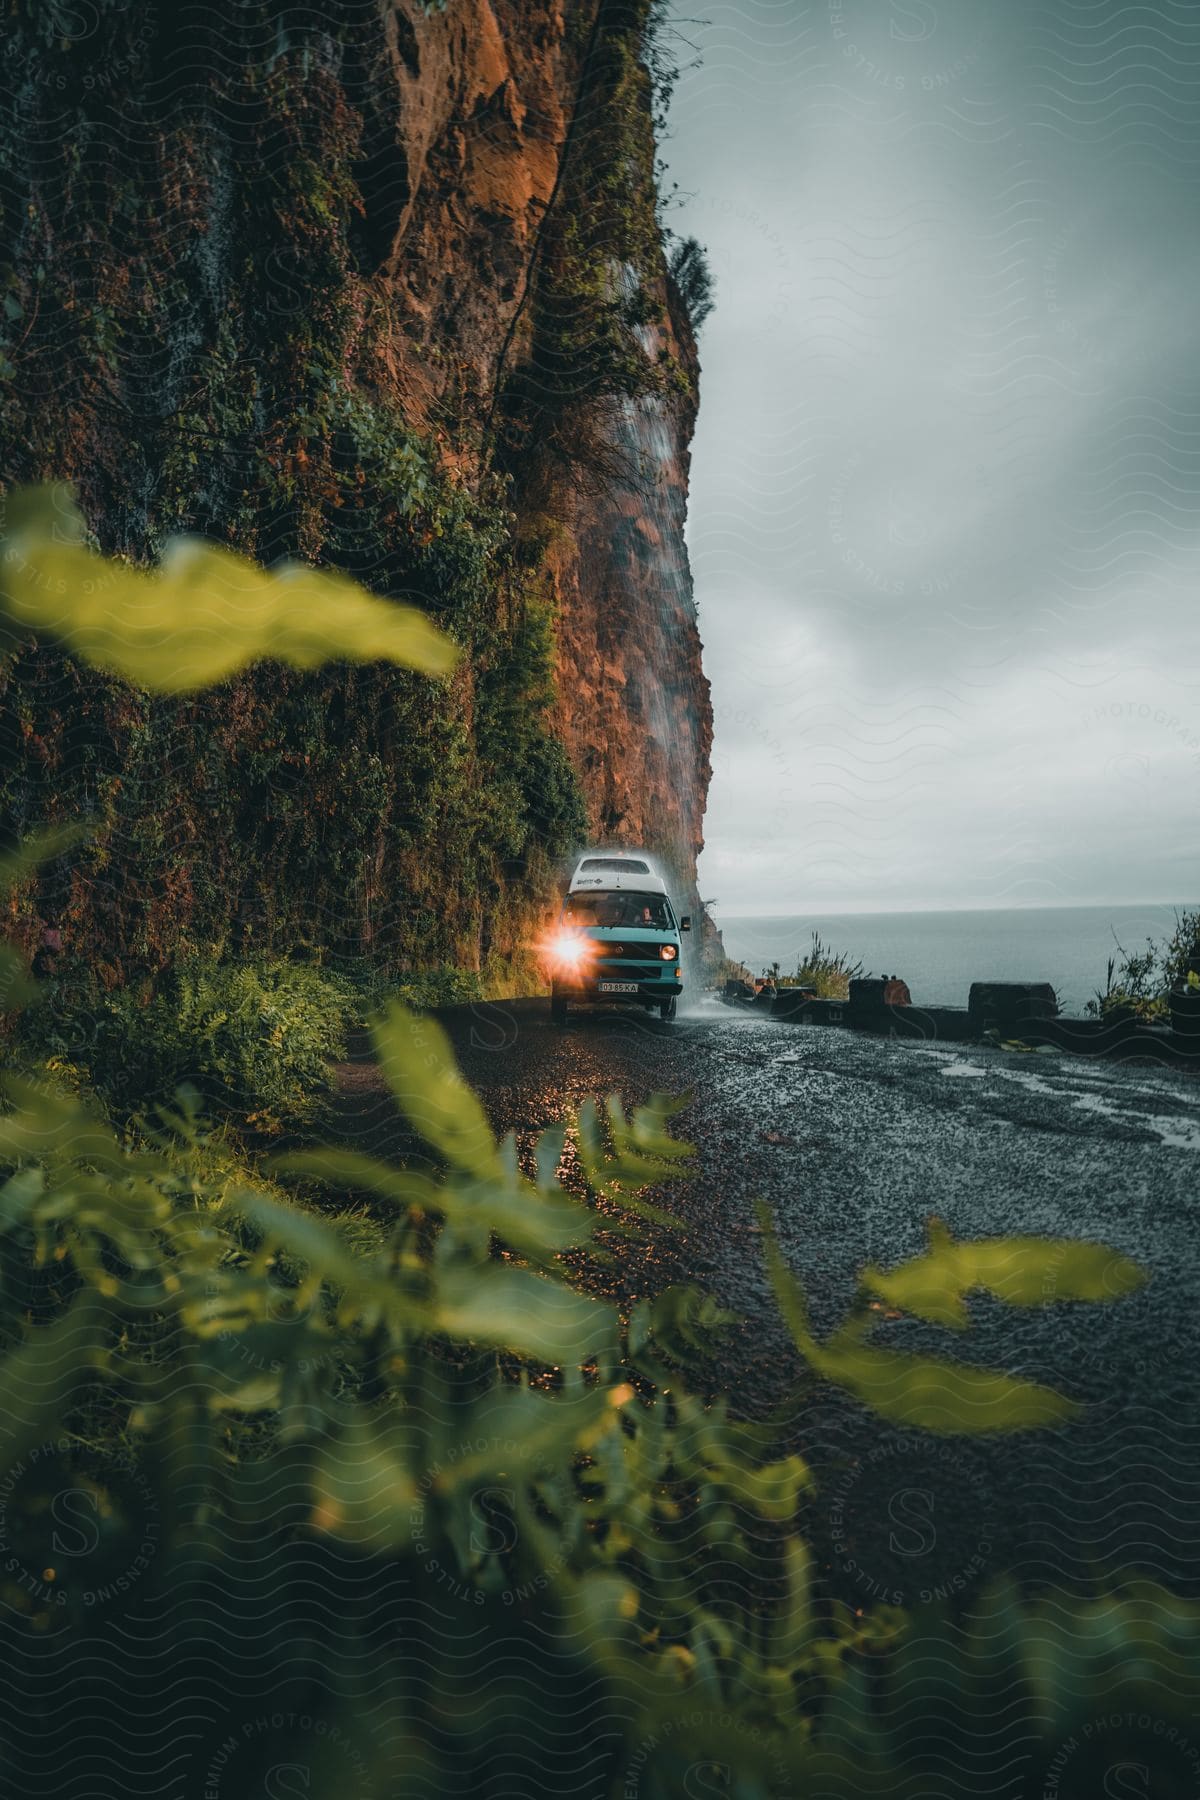 A van driving on a wet coastal road next to a large rock wall.